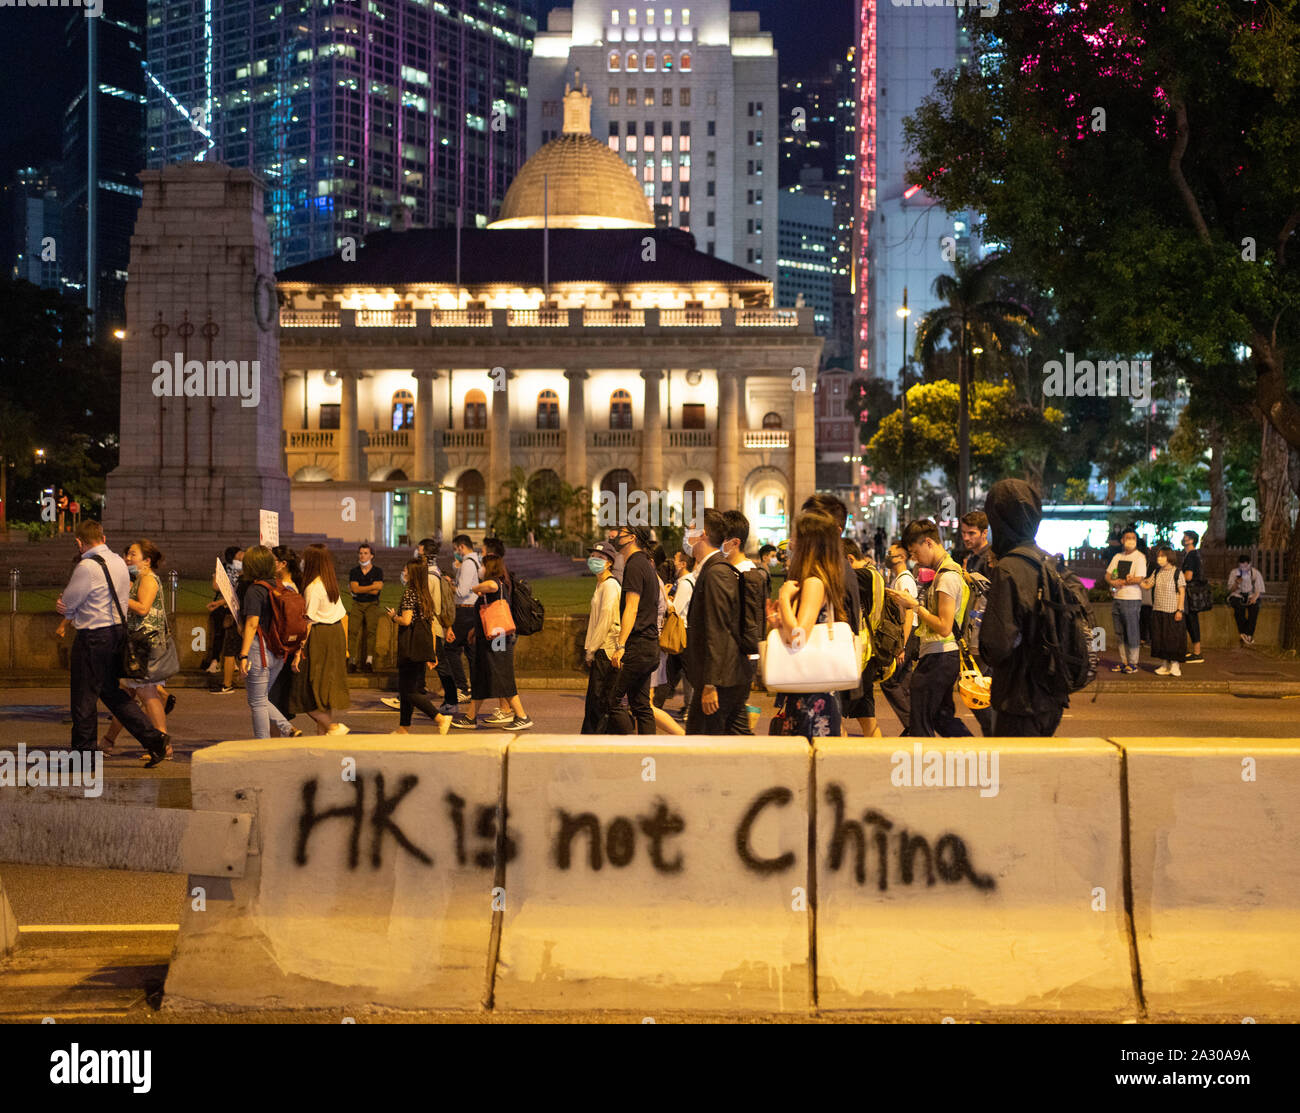 Hong Kong. 4 October 2019. Large gathering of pro- democracy supporters evening in Hong Kong Central District. Protestors angry with Chief Executive Carrie Lam's use of Emergency Powers to ban the wearing of masks during protests. March proceeded peacefully towards Wanchai district.  Iain Masterton/Alamy Live News. Stock Photo